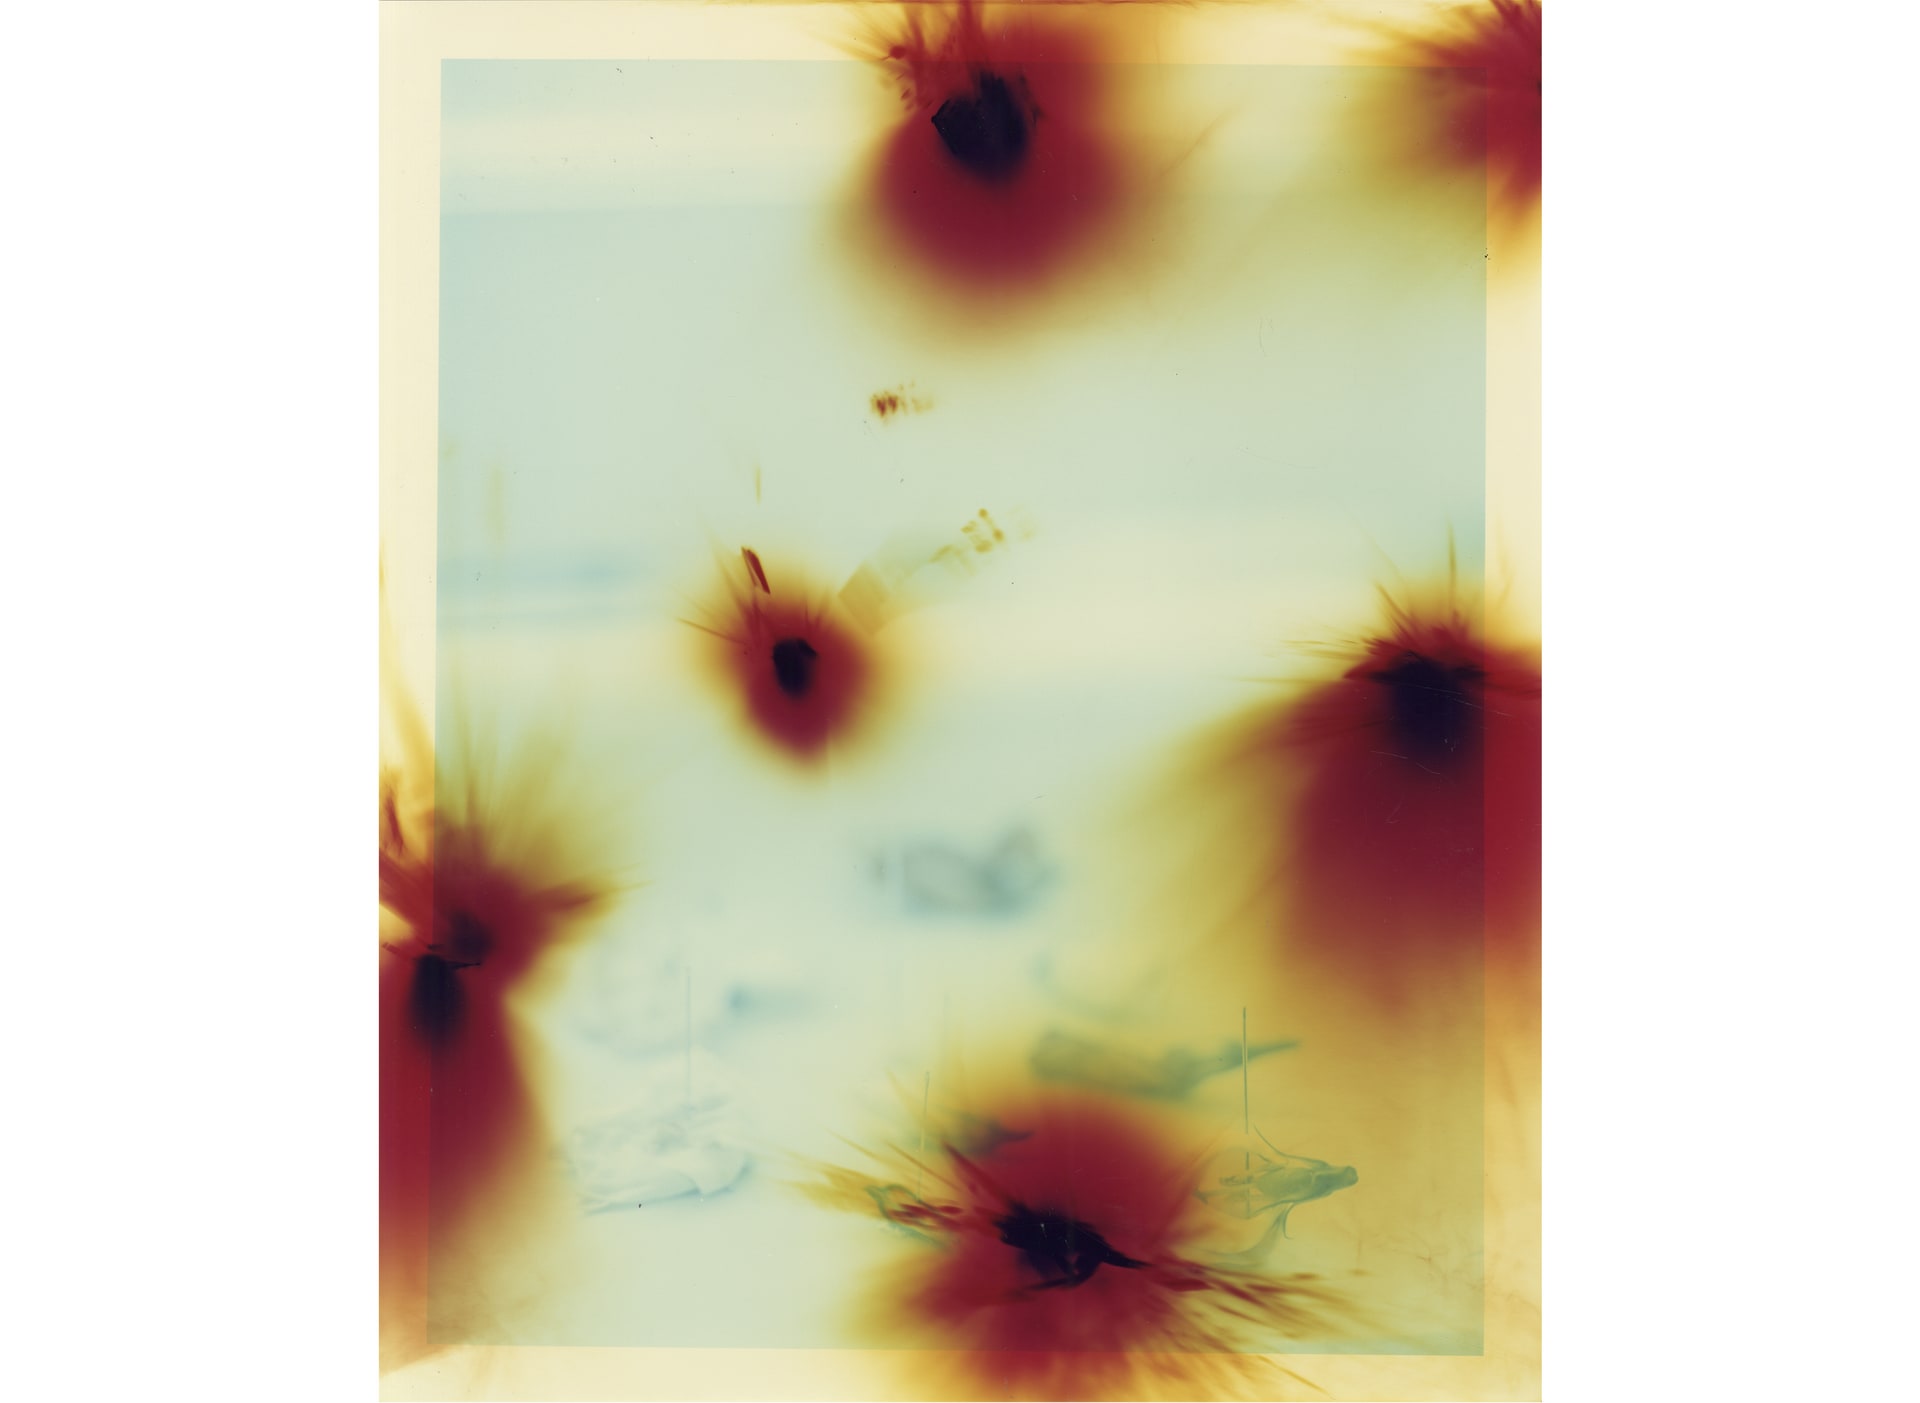 “Flower petals pinned on the window”